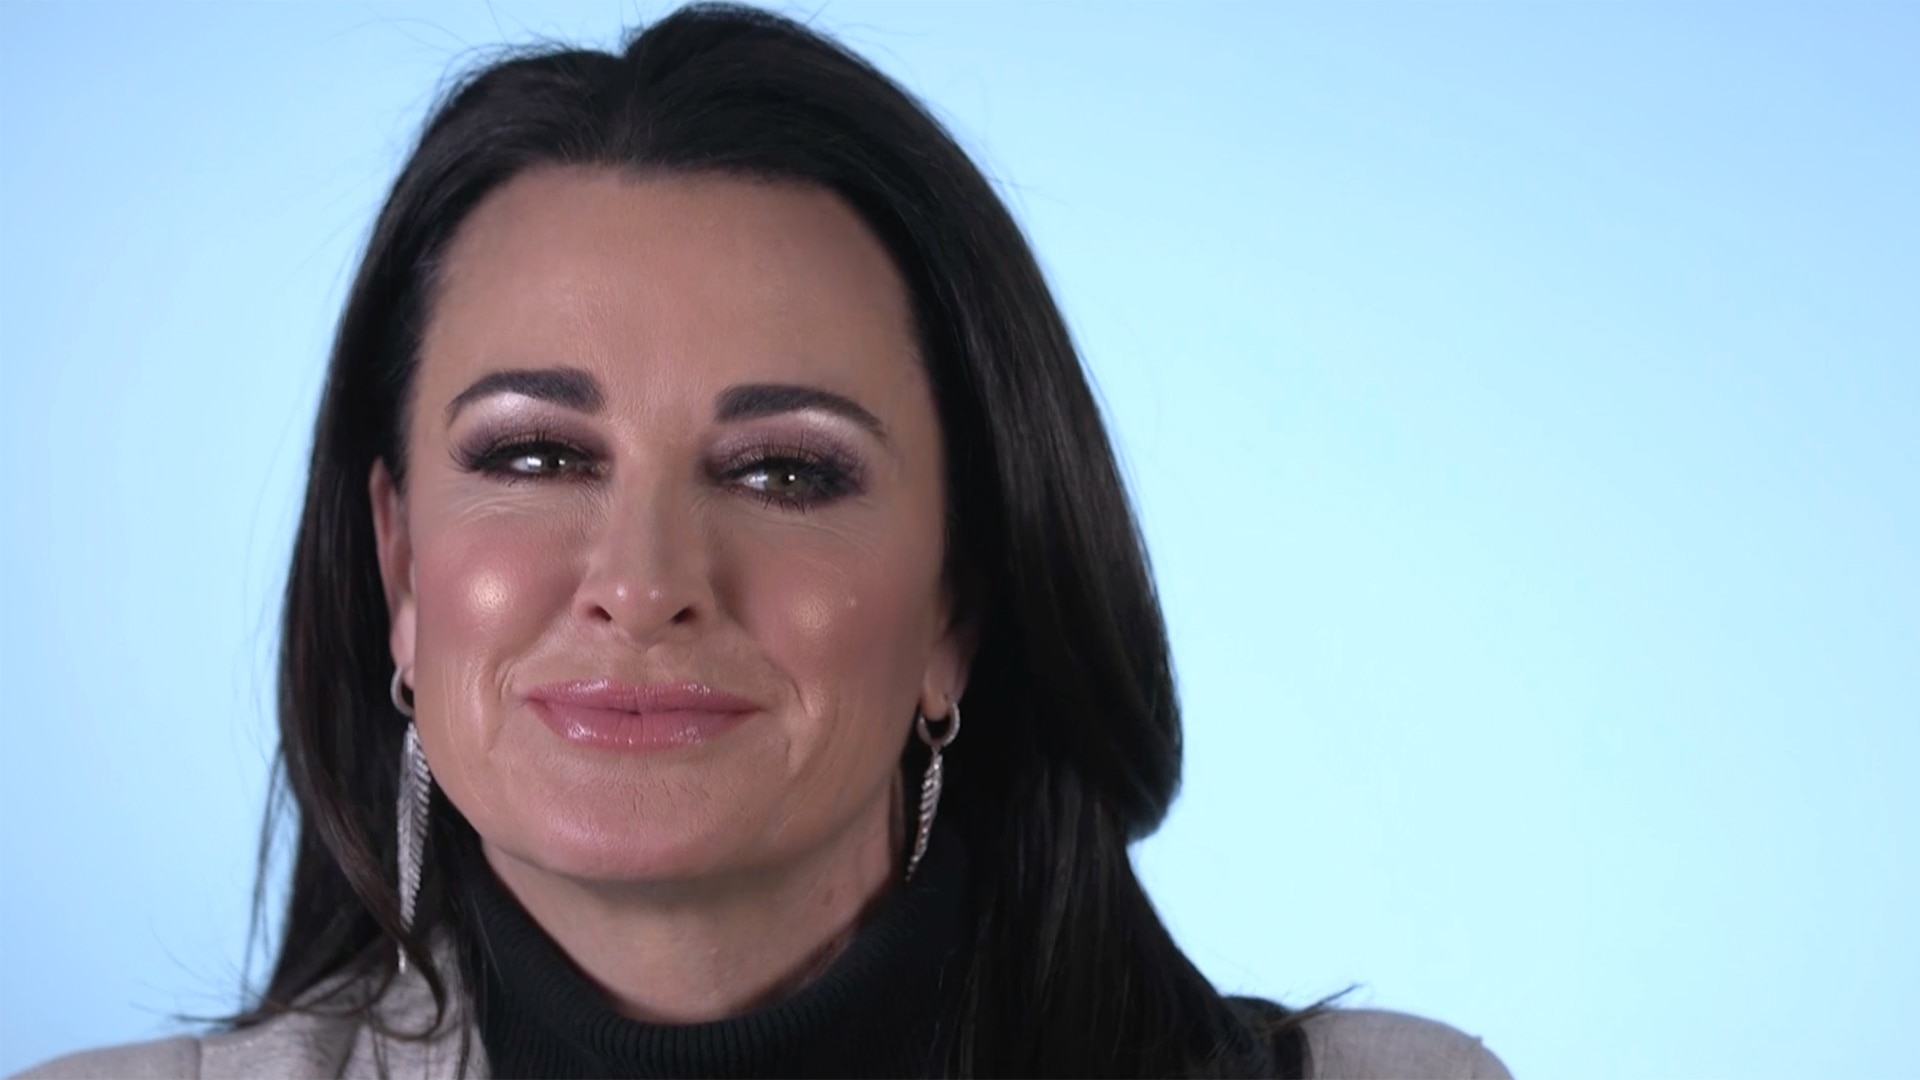 Kyle Richards looks mesmerizing in her dazzling pink dress as she gives  fans a behindthescenes look at The Real Housewives Of Beverly Hills  reunion  UK Daily News